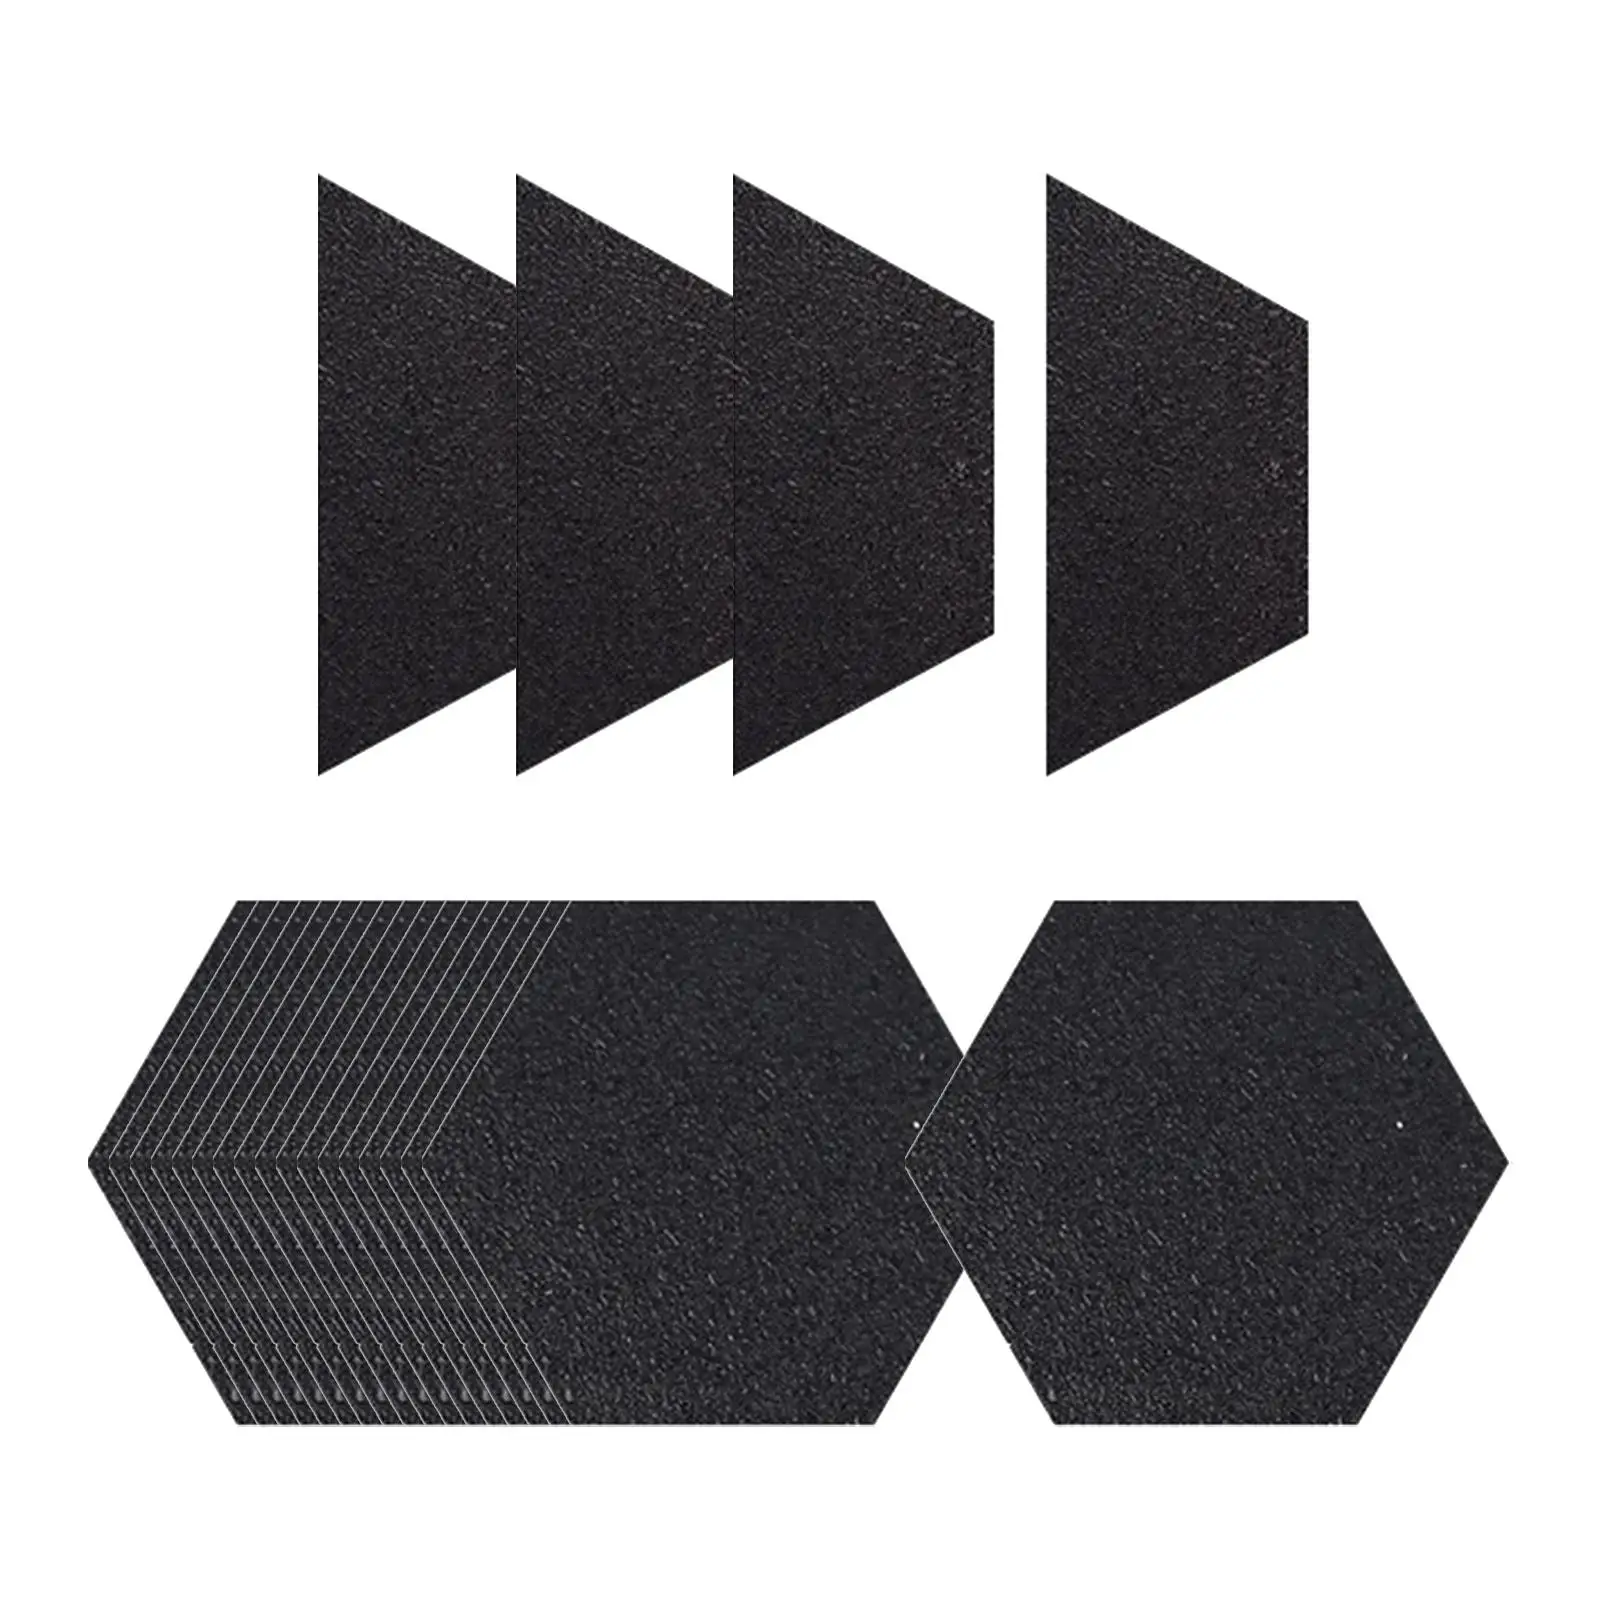 Hexagon Surfboard Pads Anti Slip Mat Waxless Deck Pads for Shortboards Surf Boards Skimboarding Grip Surf Paddleboard